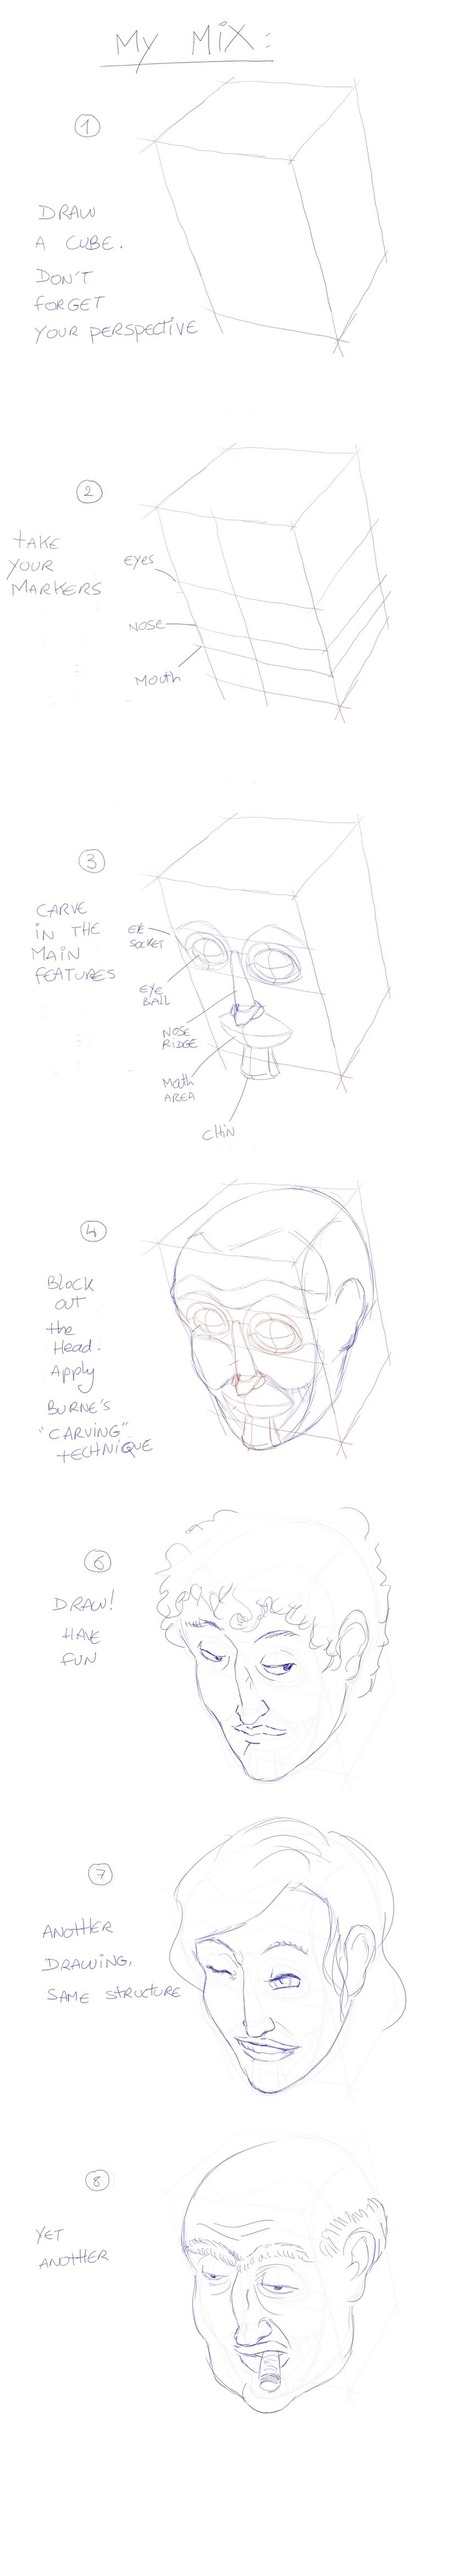 Quick Drawing Heads Tutorial | Drawing and Painting Tutorials | Scoop.it